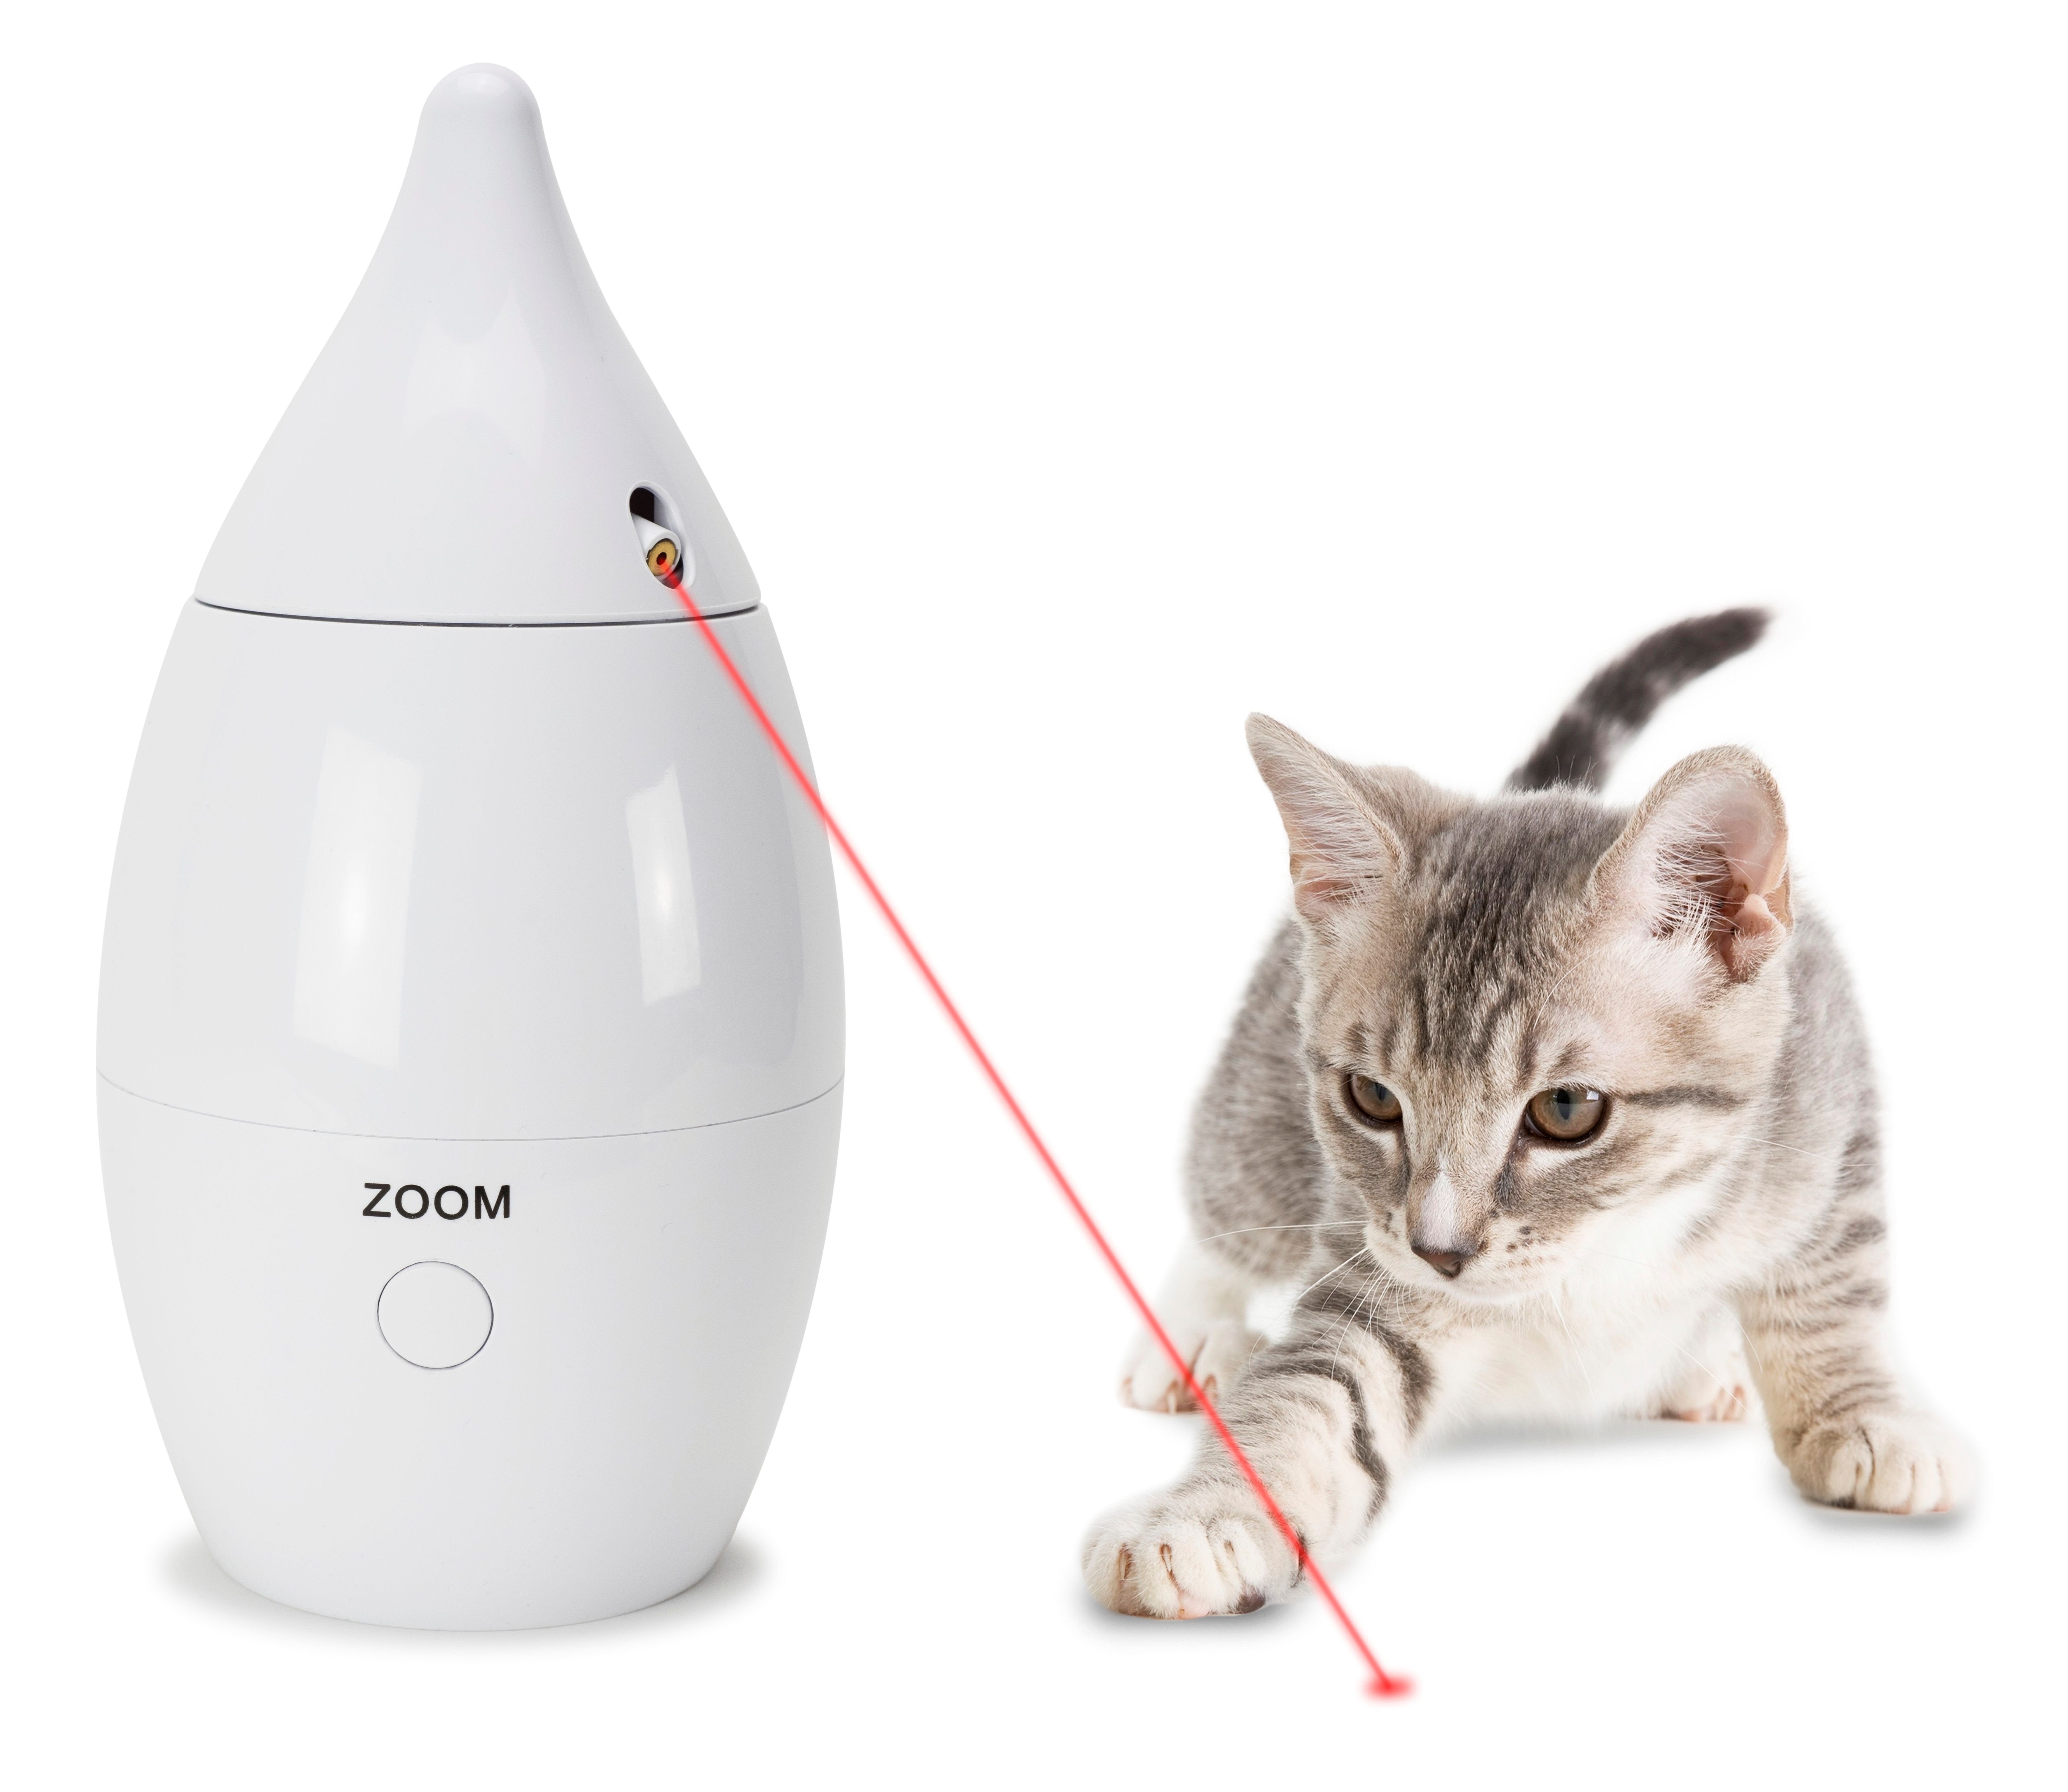 ZOOM Automatic Laser Toy